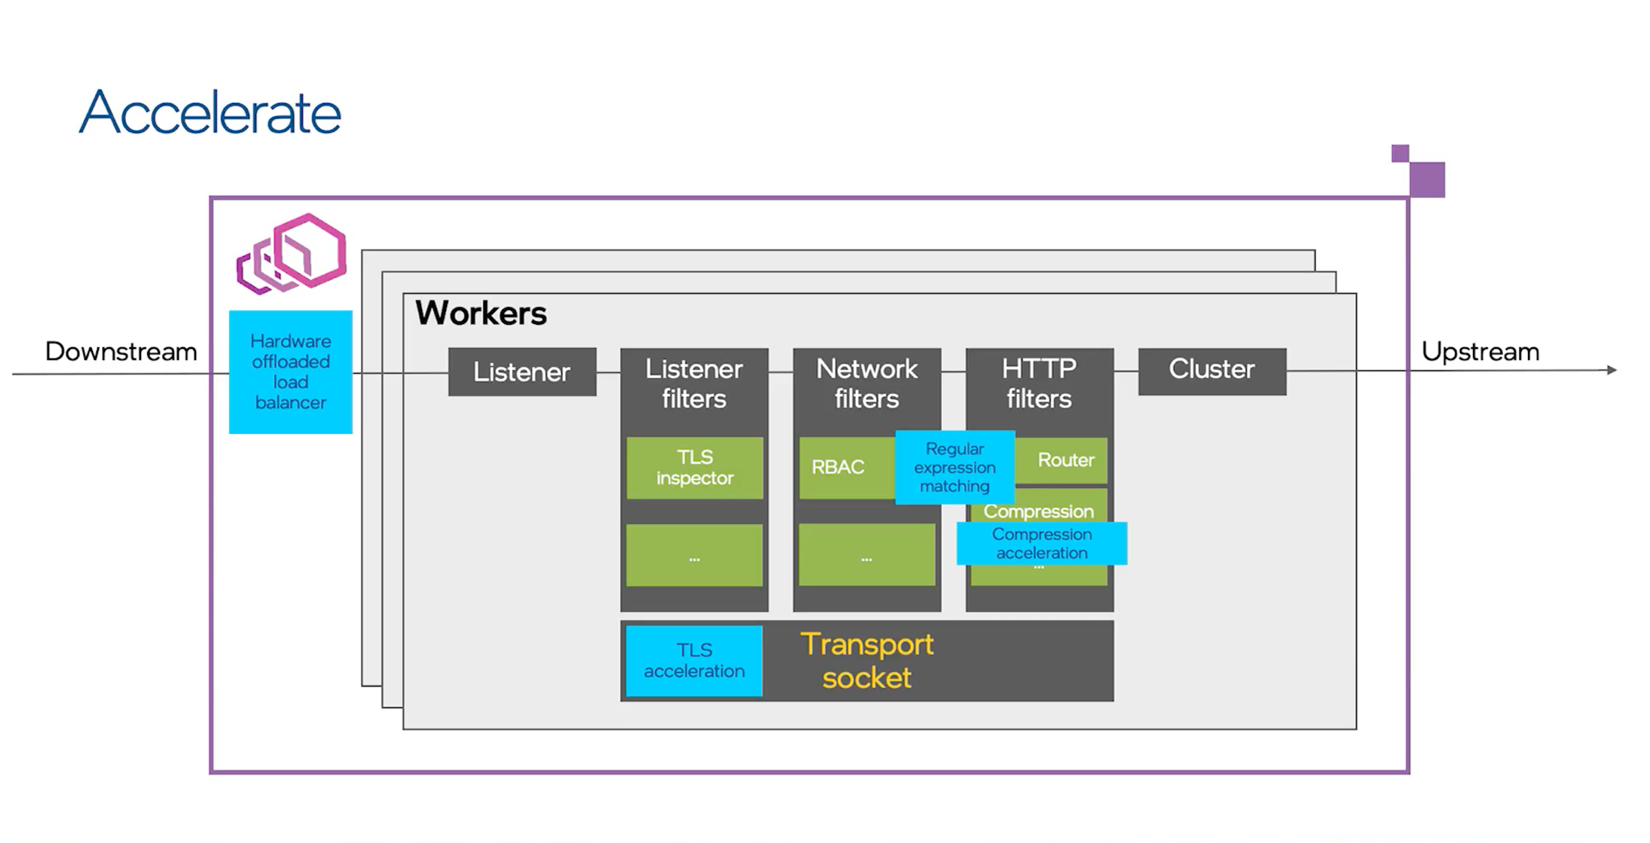 An Intel® service mesh architecture graph highlights in blue boxes where Intel adds hardware capabilities.